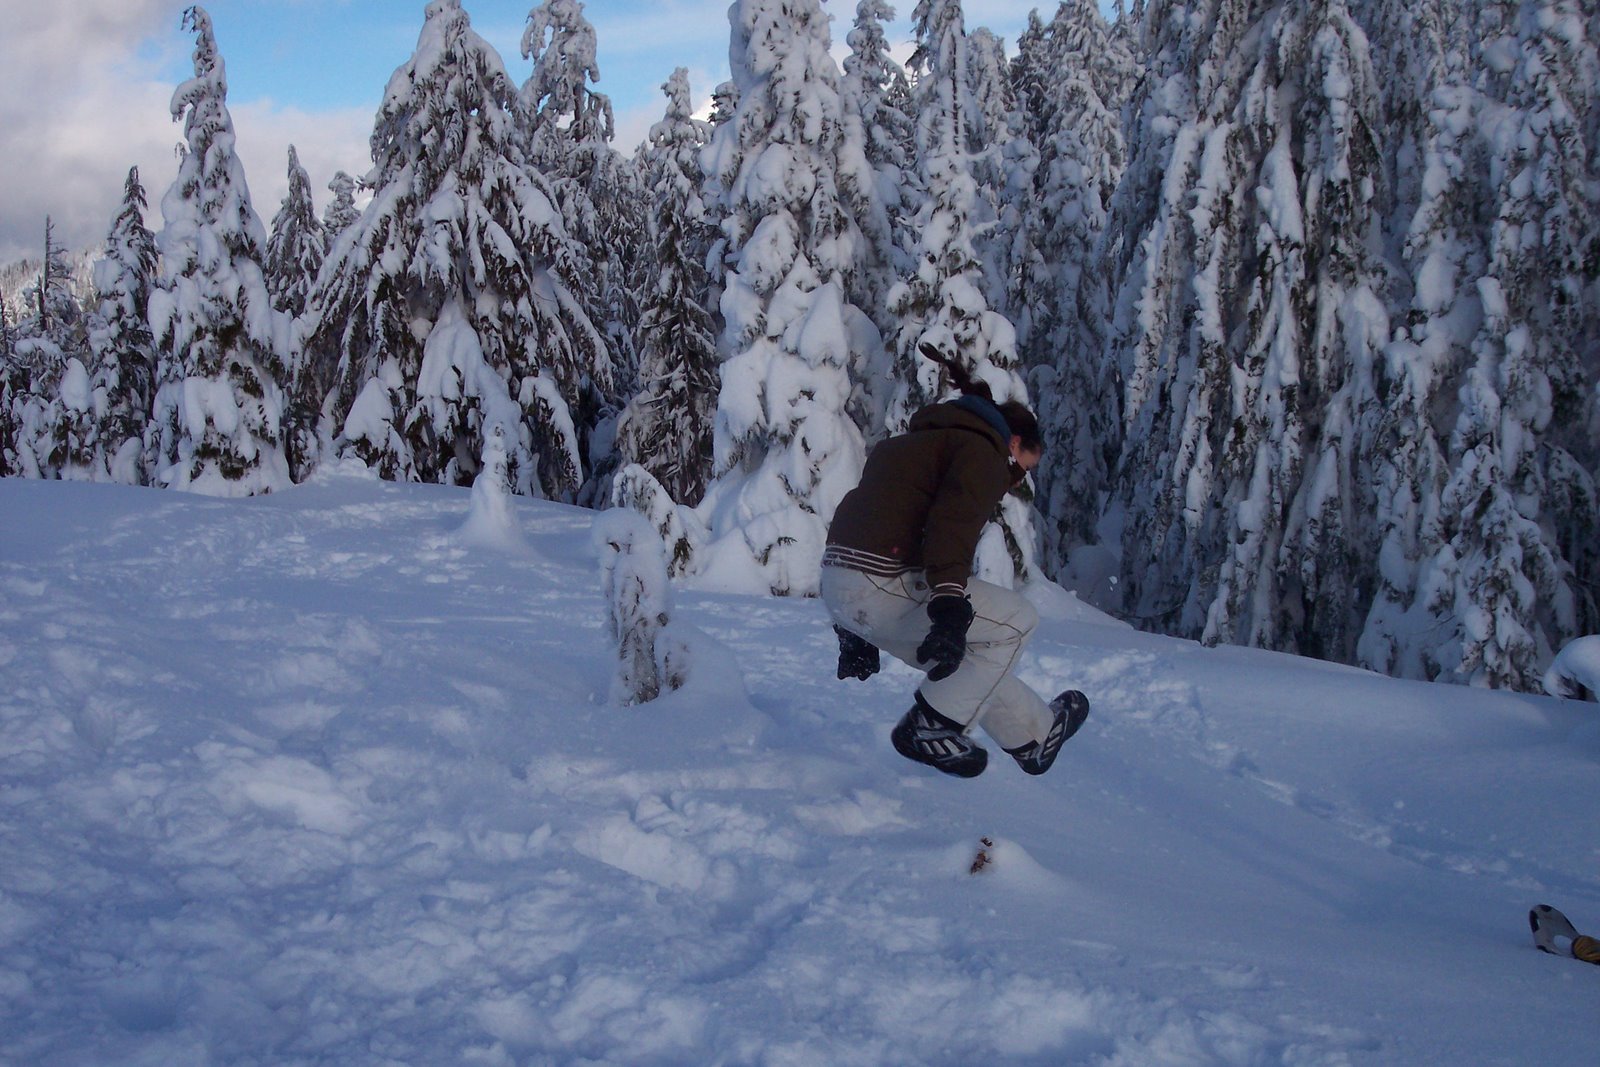 [Jumping+in+the+snow+on+Dog+Mountain.JPG]